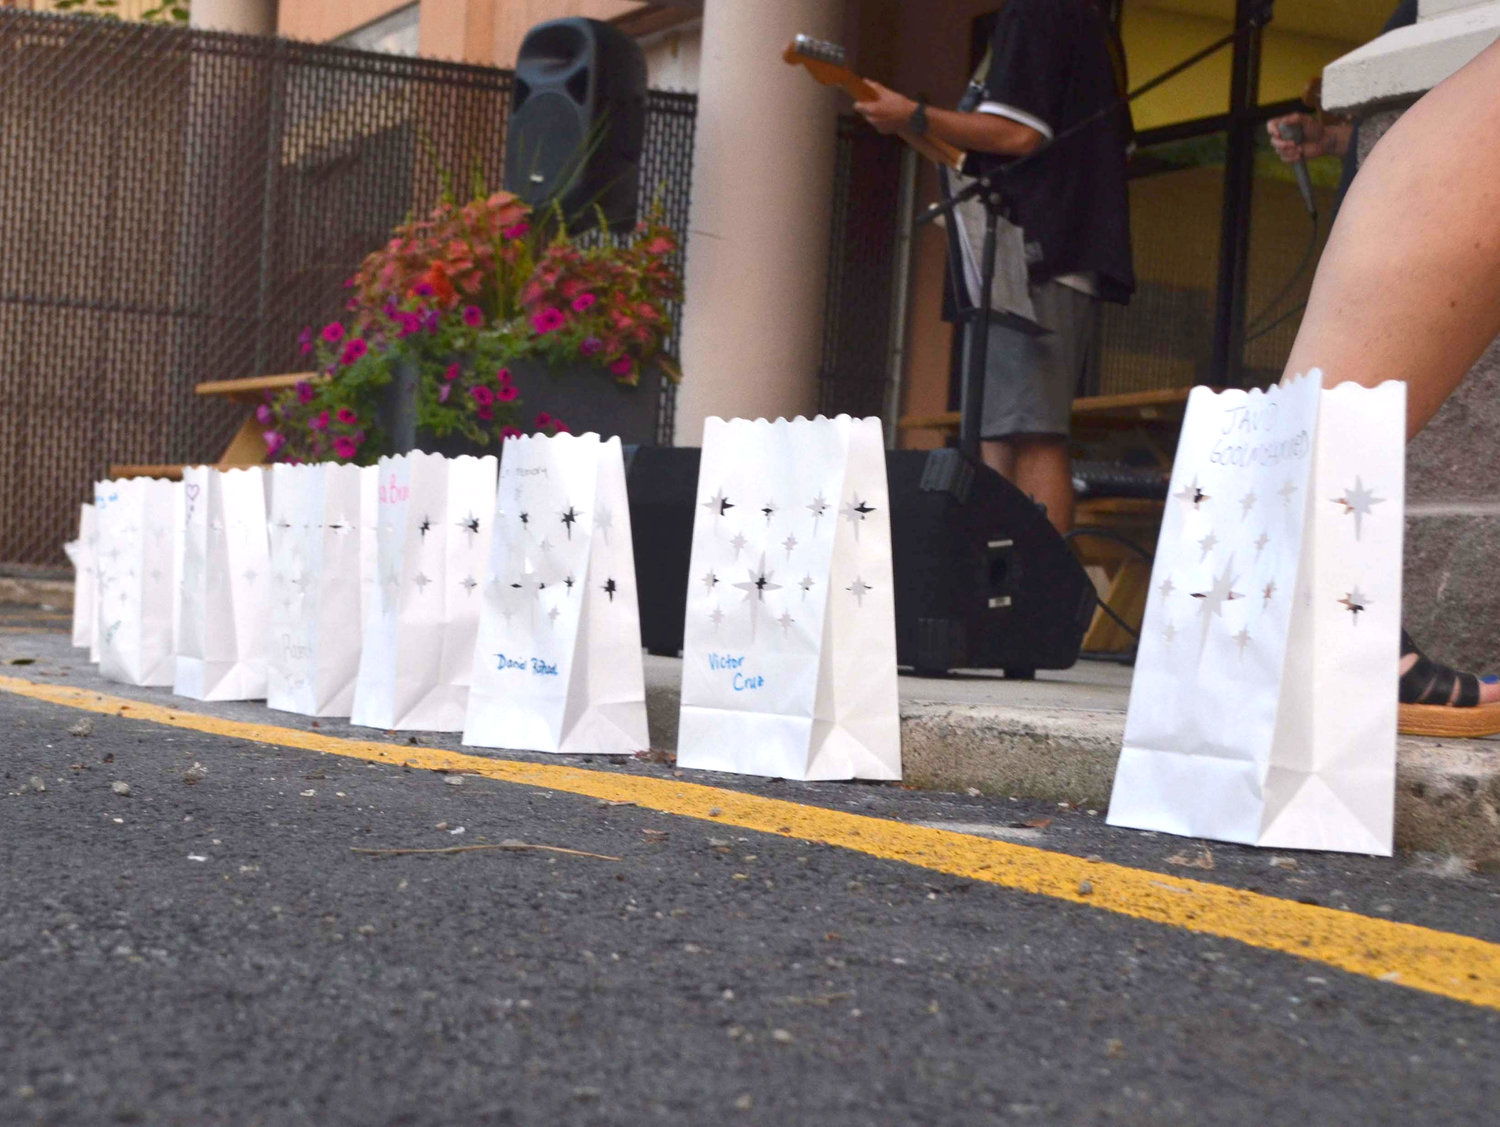 The names of those lost to overdose in Sullivan County stand written on paper bags at a vigil for International Overdose Awareness Day held on August 31, 2021.